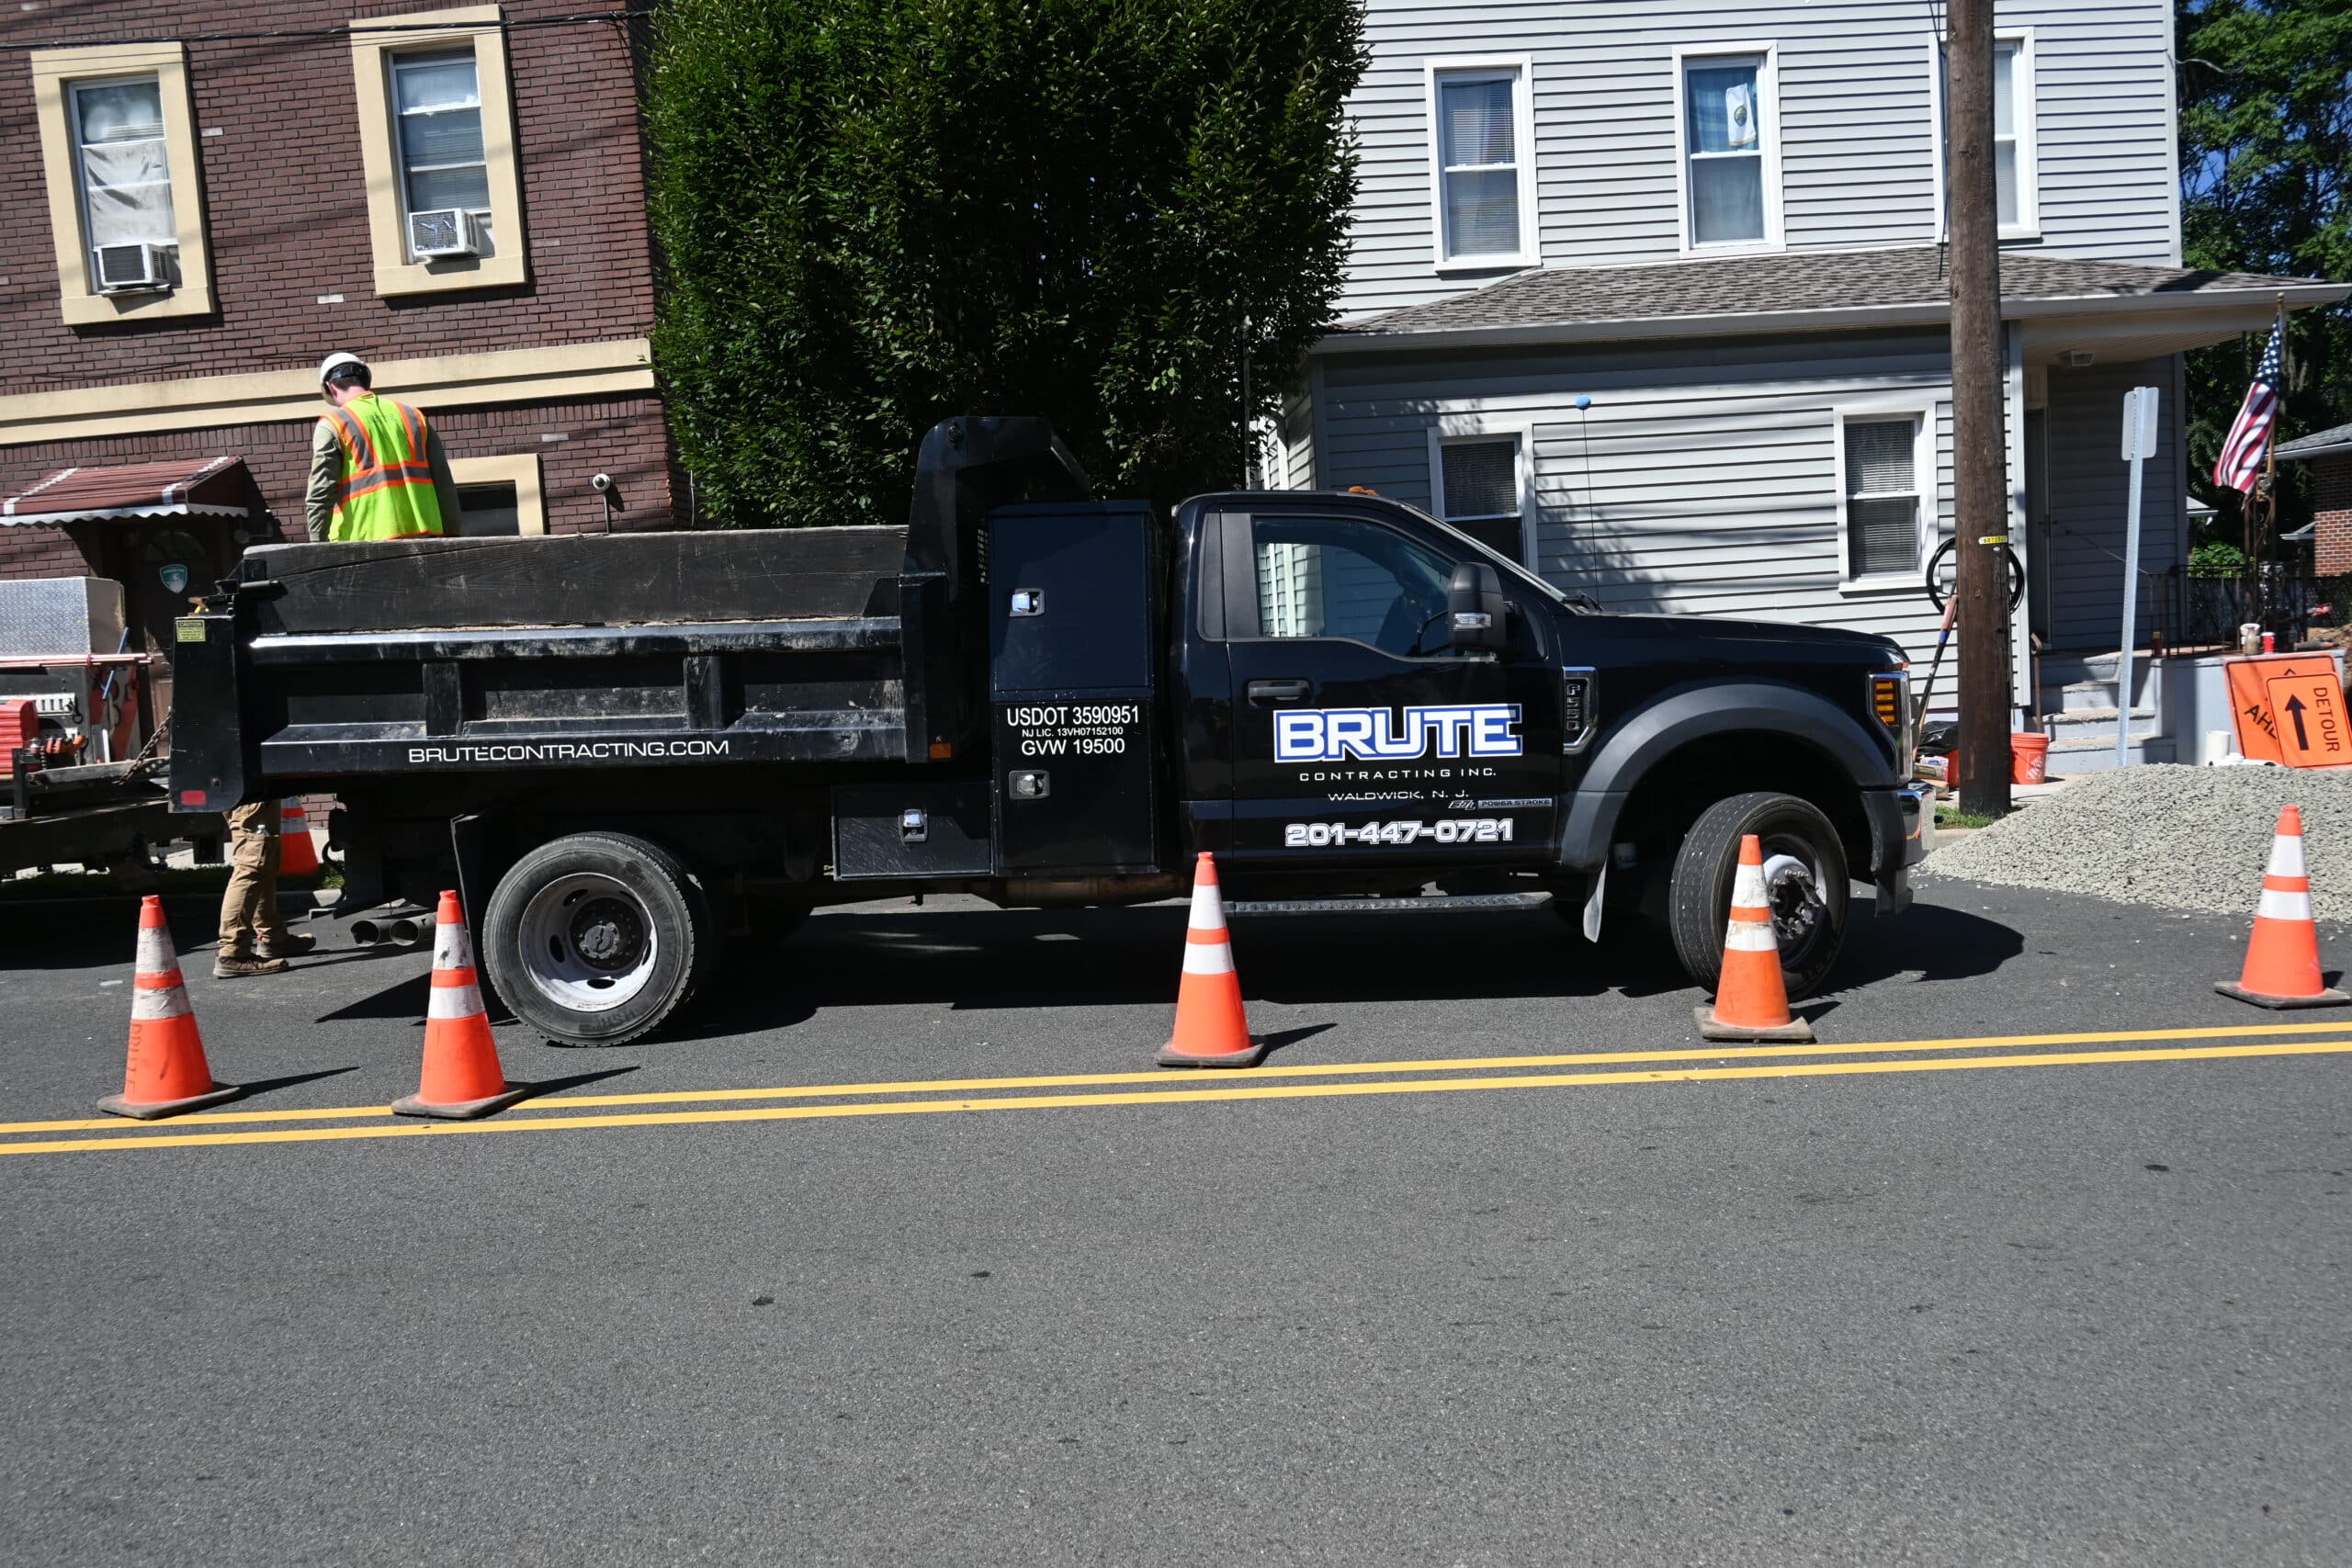 BRUTE Contracting truck in front of residential apartment building and residential home.